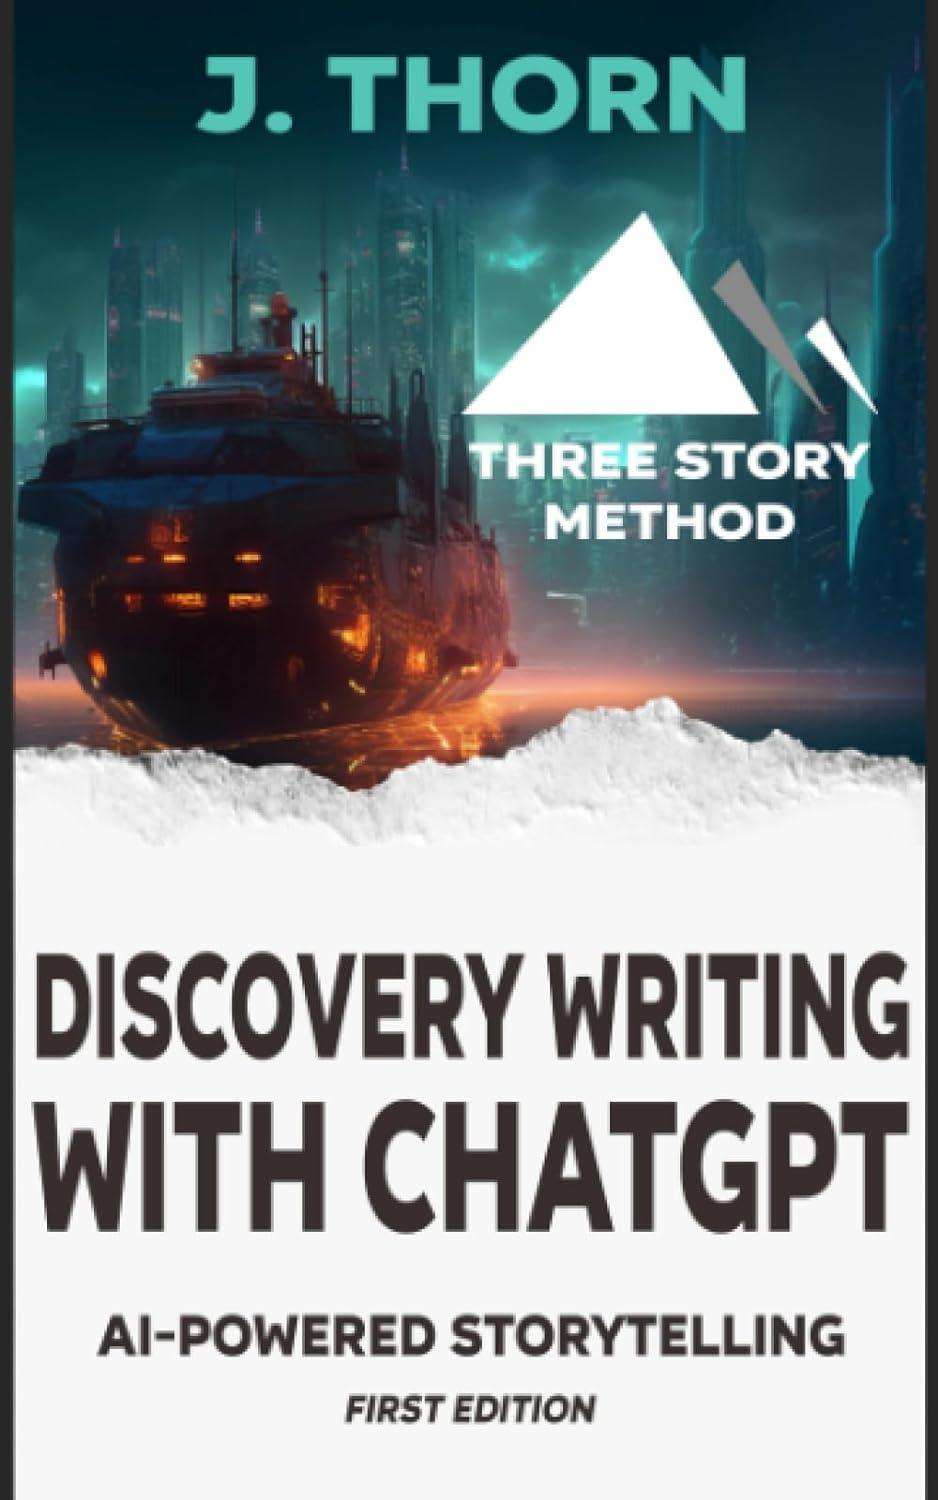 three story method discovery writing with chatgpt ai powered storytelling 1st edition j. thorn b0cc7h4912,